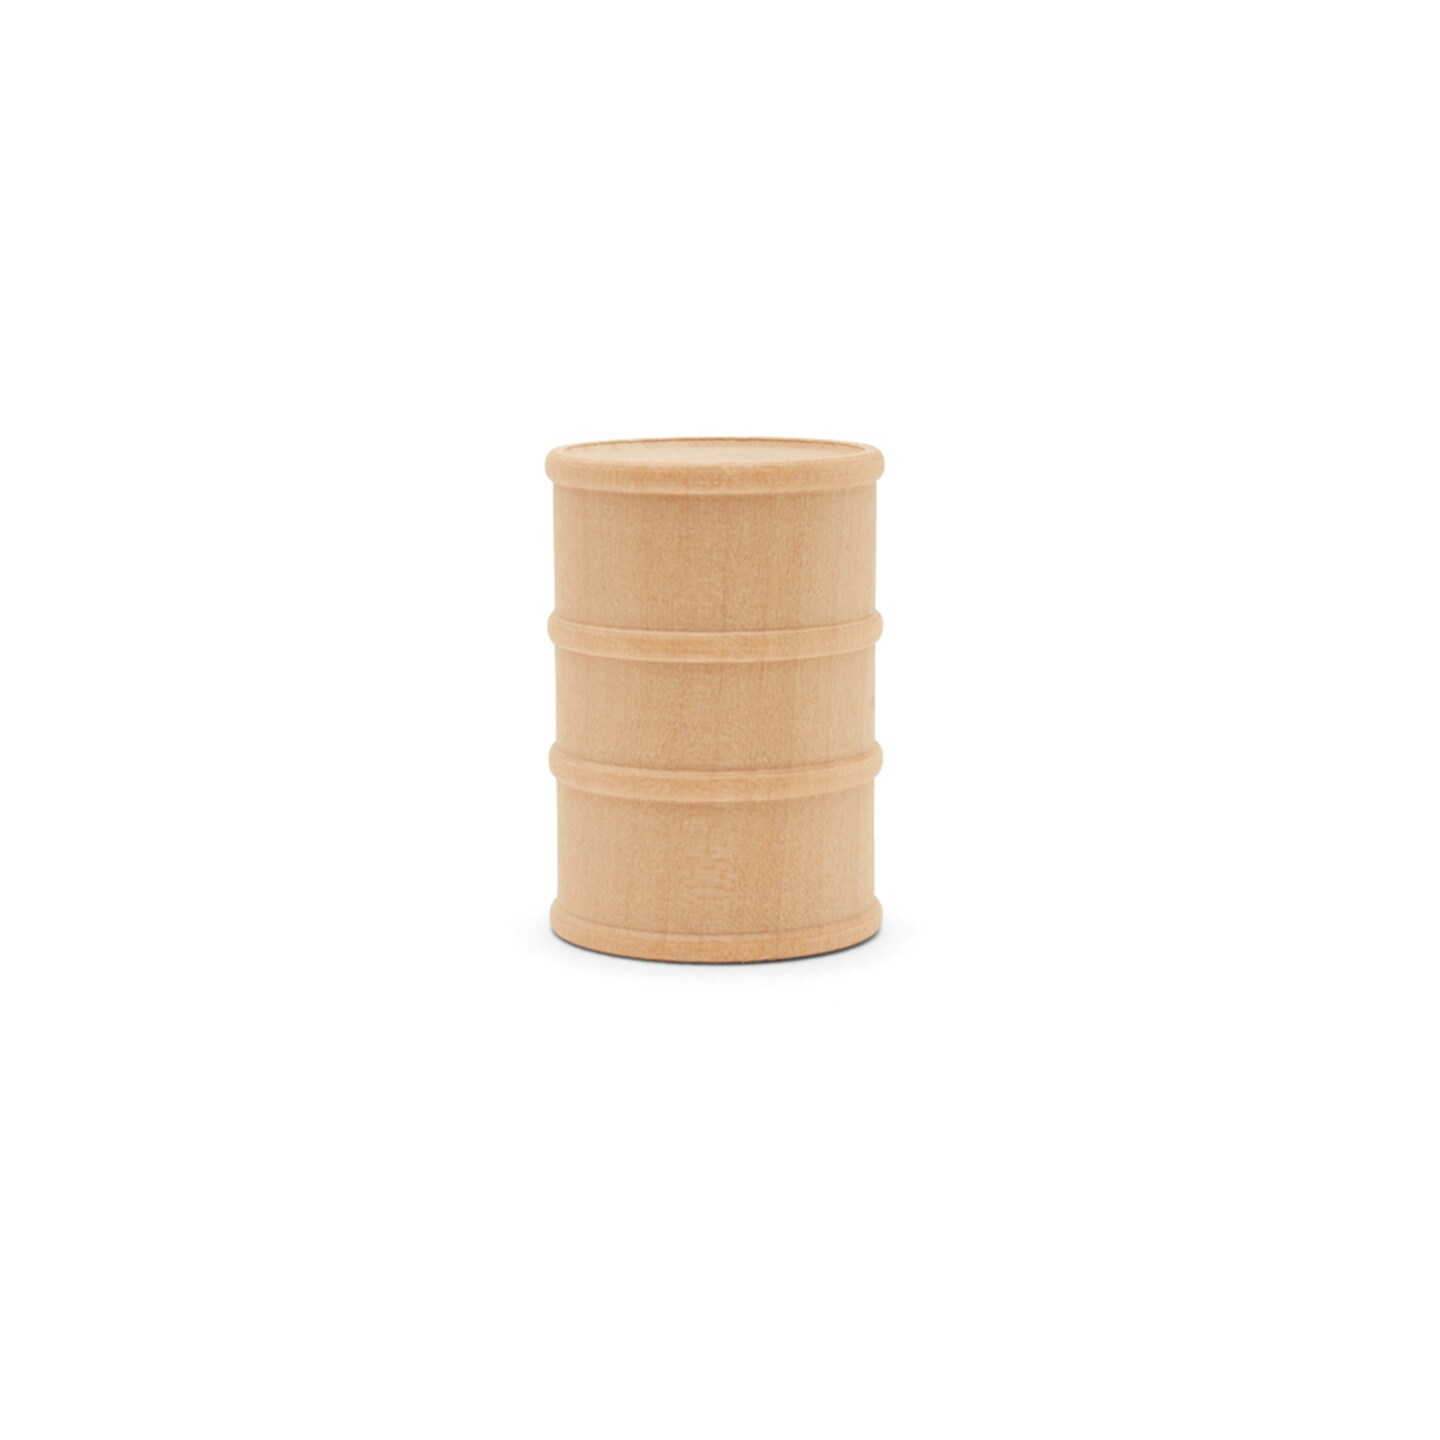 Wooden Oil Barrel 1-5/8 inch for Miniatures, Scale Model, Toy Train| Woodpeckers